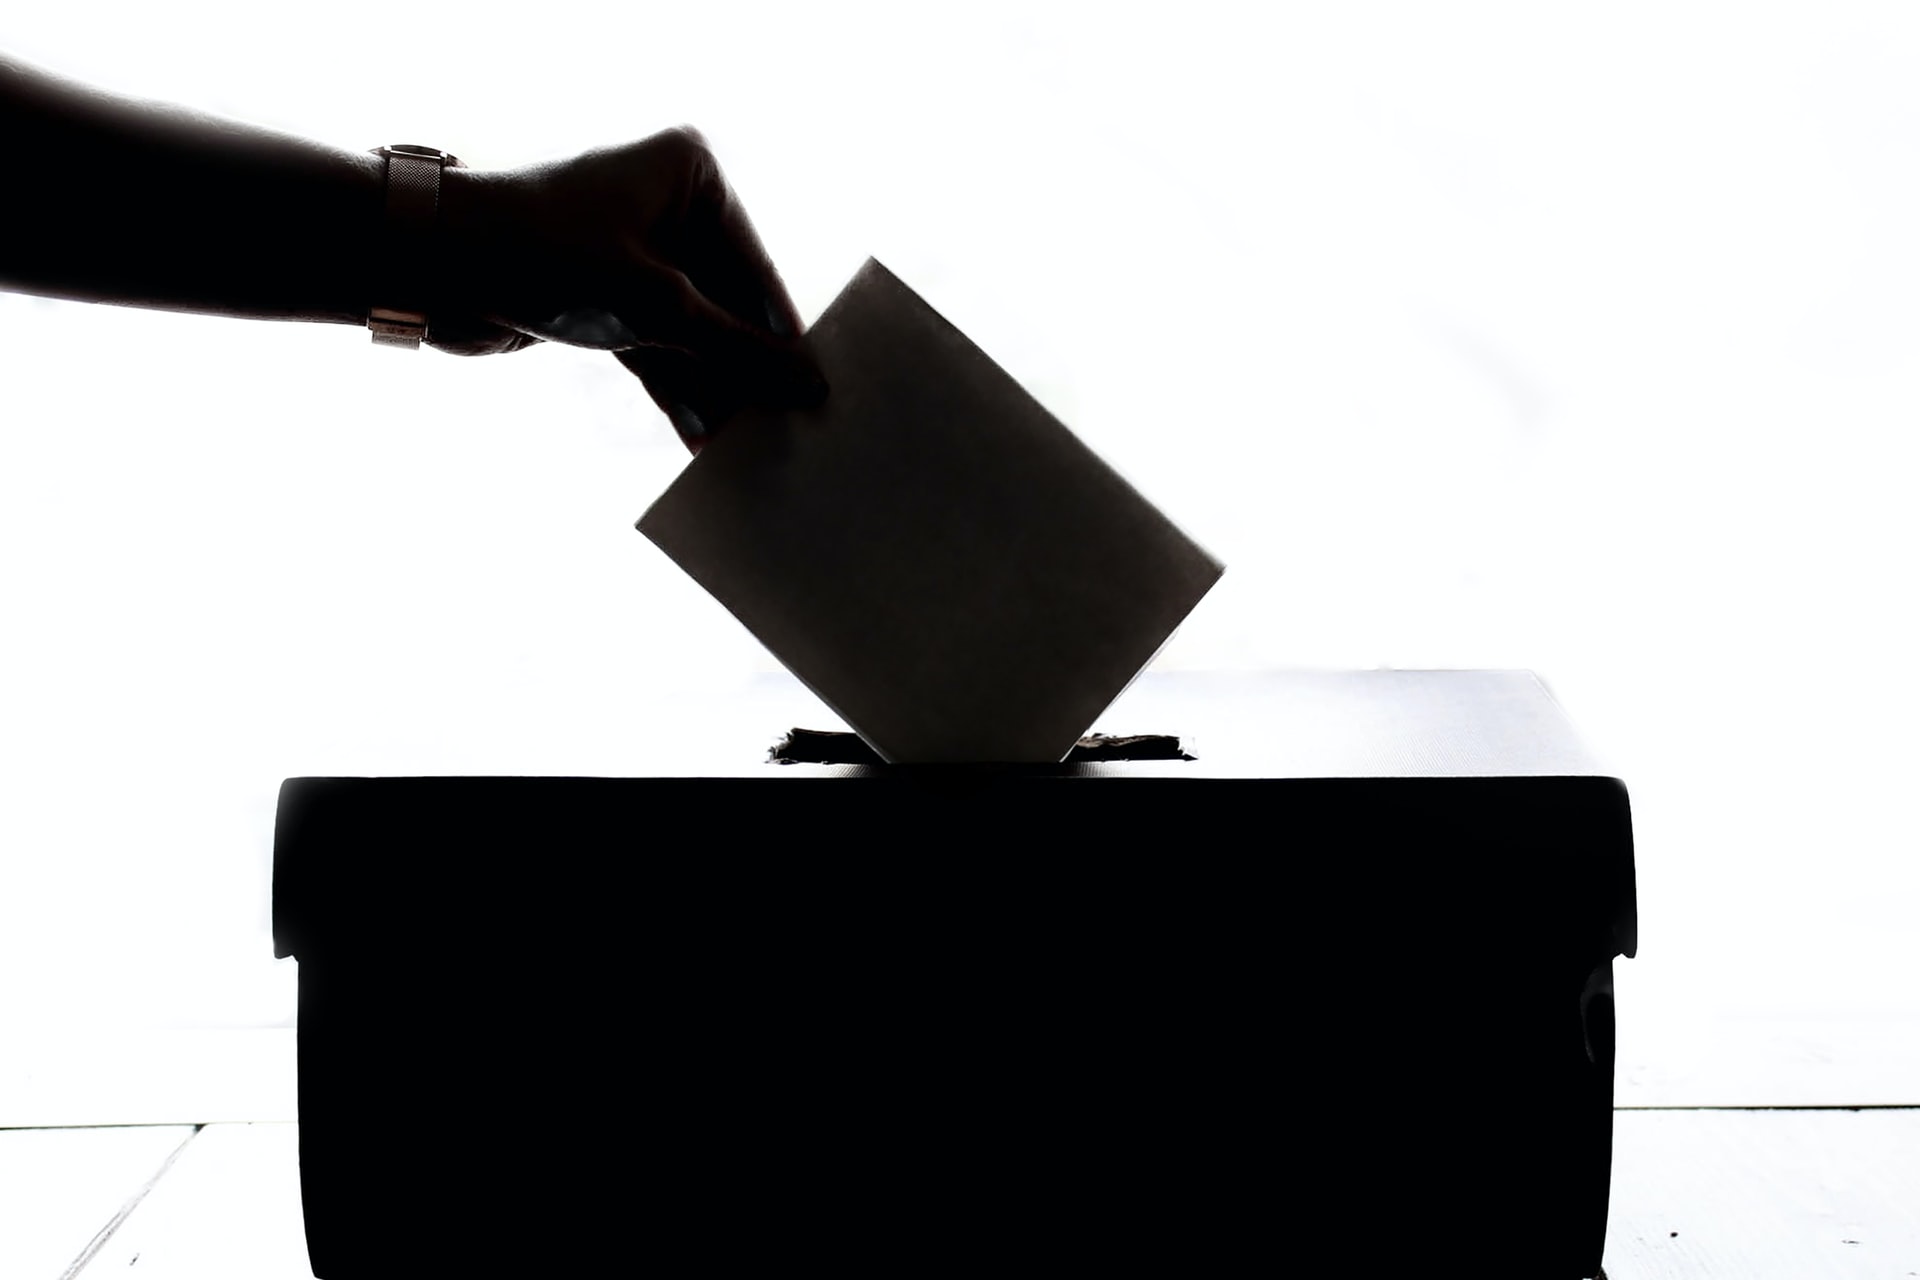 Returning Absentee Ballots during the 2020 Election – A Surprise Ending?